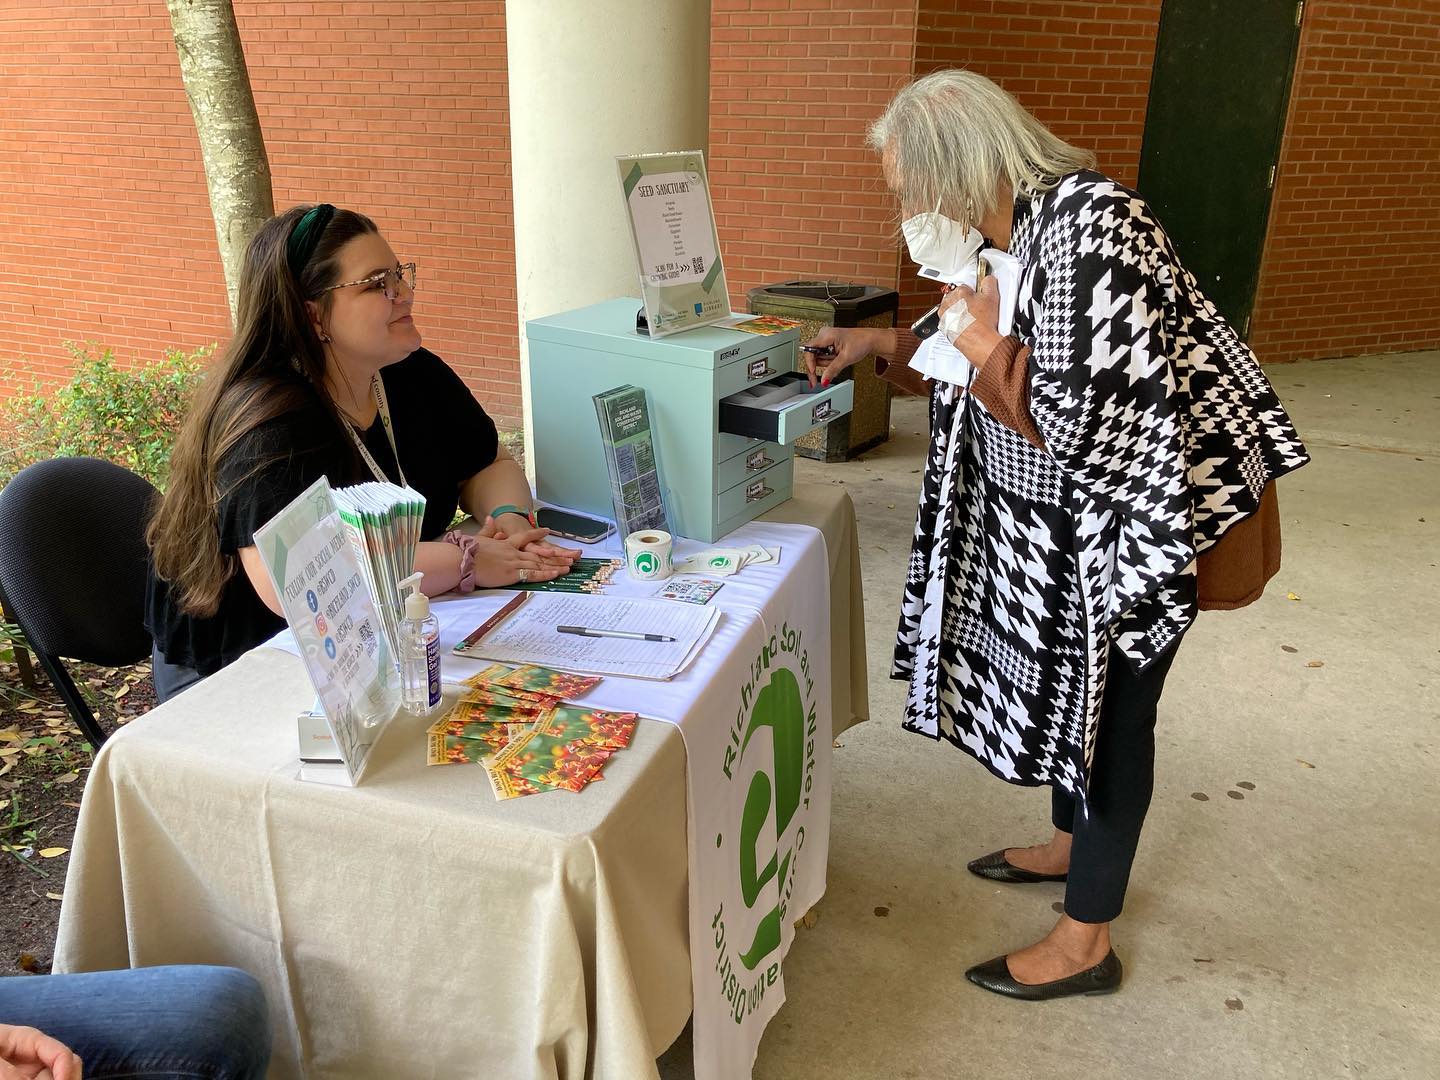 A Richland Soil and Water Conservation District employee sits behind a table at a community event while a member of the public takes seeds from the Seed Sanctuary.